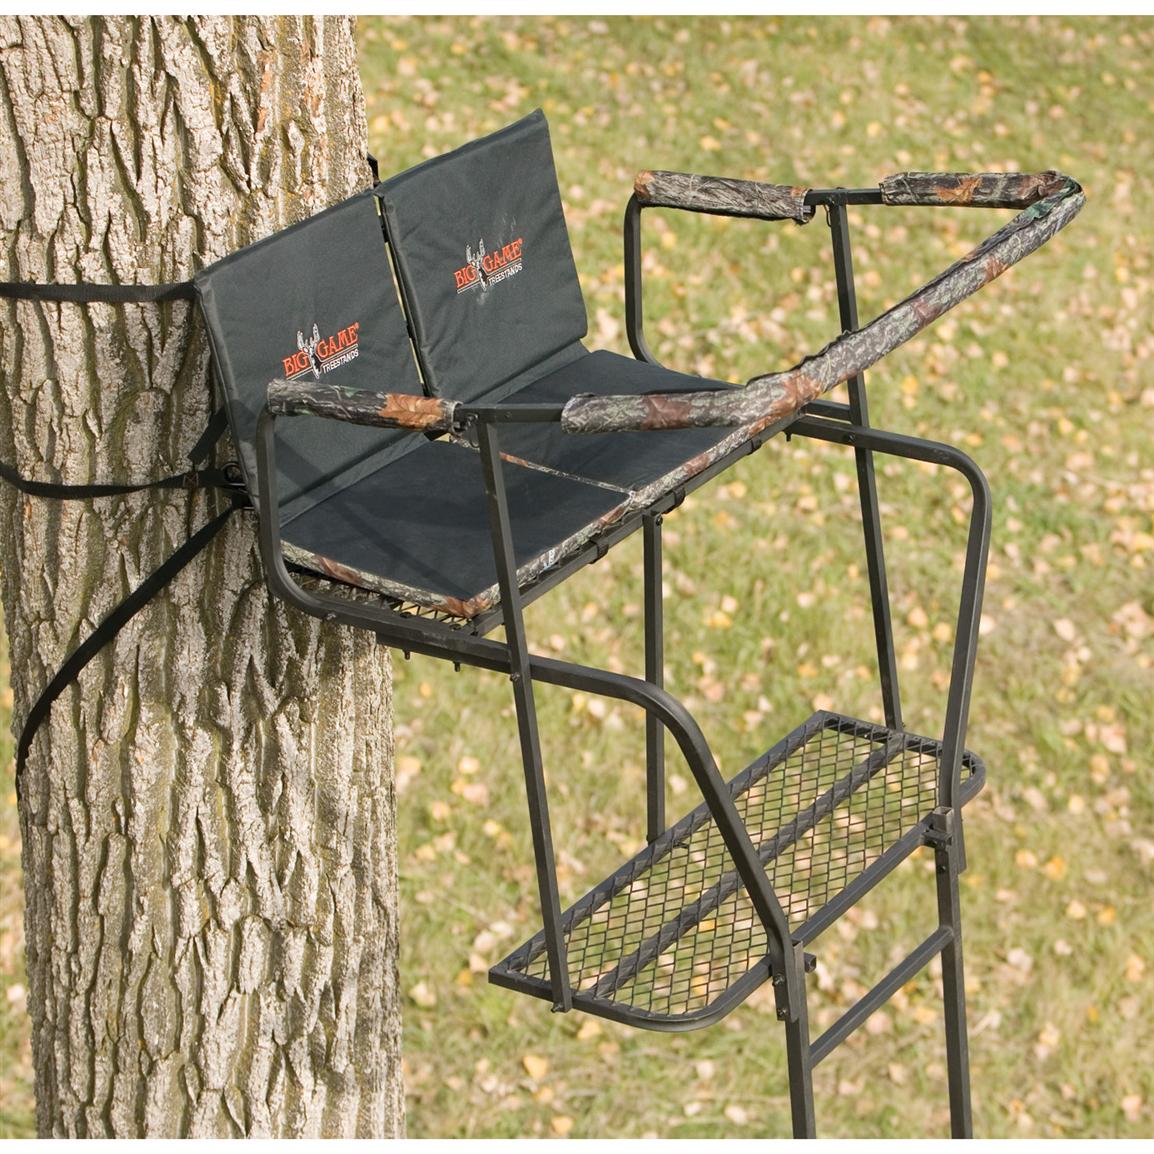 15' The Big Buddy™ Ladder Stand from Big Game® Treestands - 167465 ...